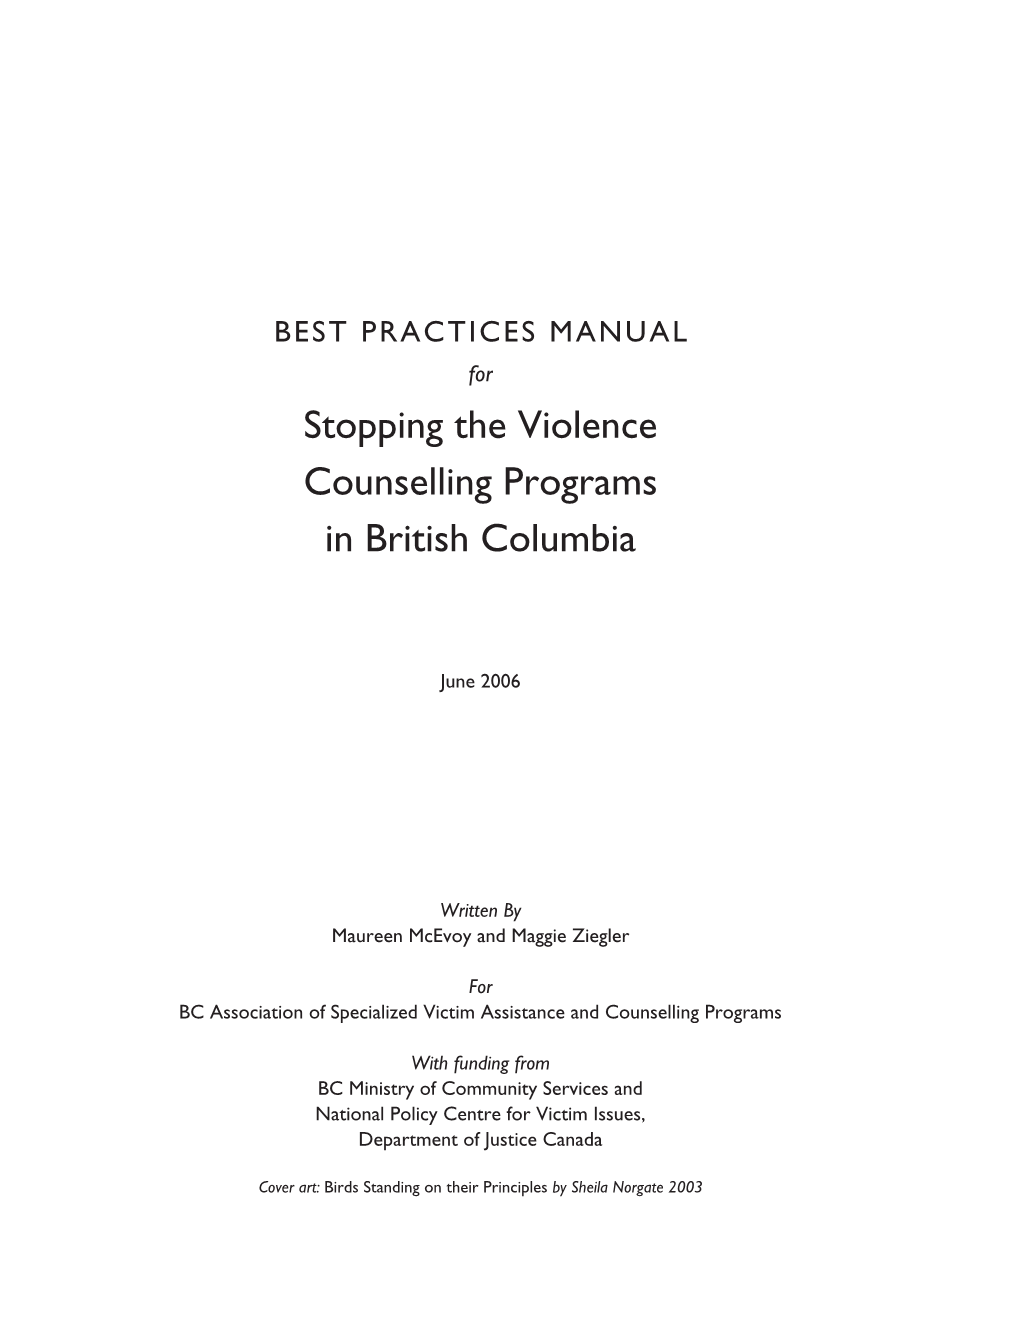 BEST PRACTICES MANUAL for Stopping the Violence Counselling Programs in British Columbia